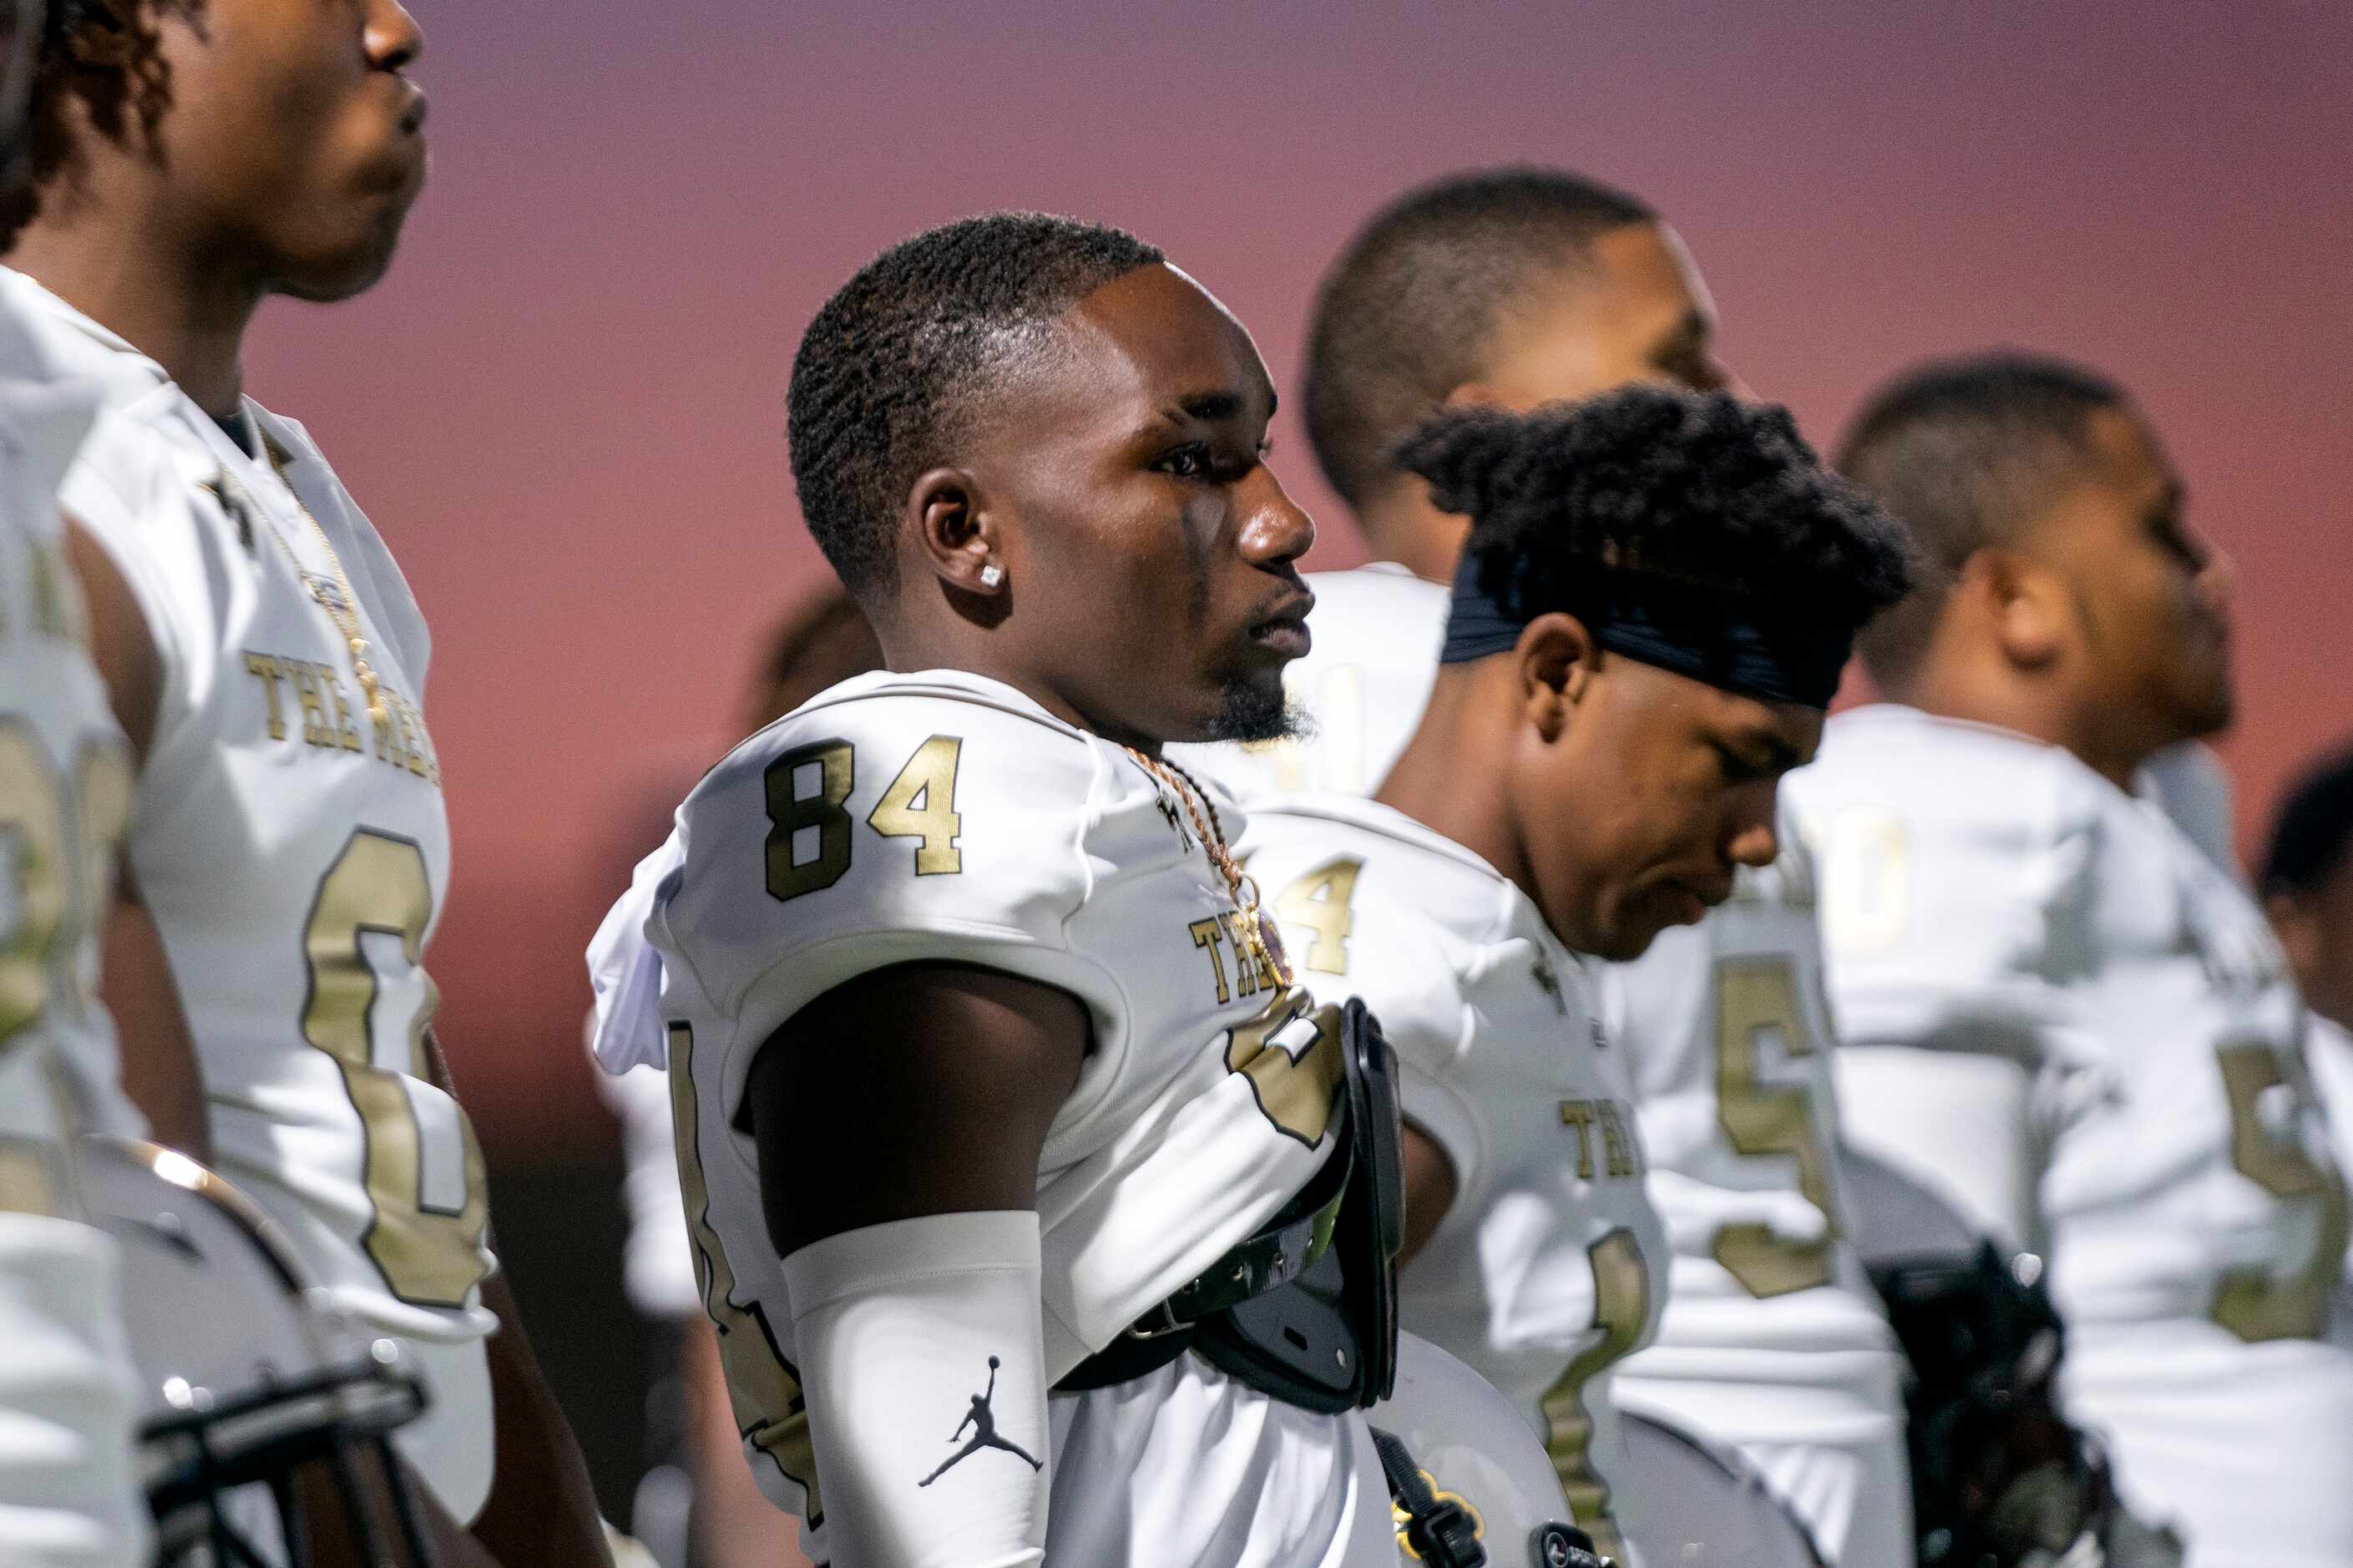 South Oak Cliff senior wide receiver Jordan Mayes (84) waits to take the field before a high...